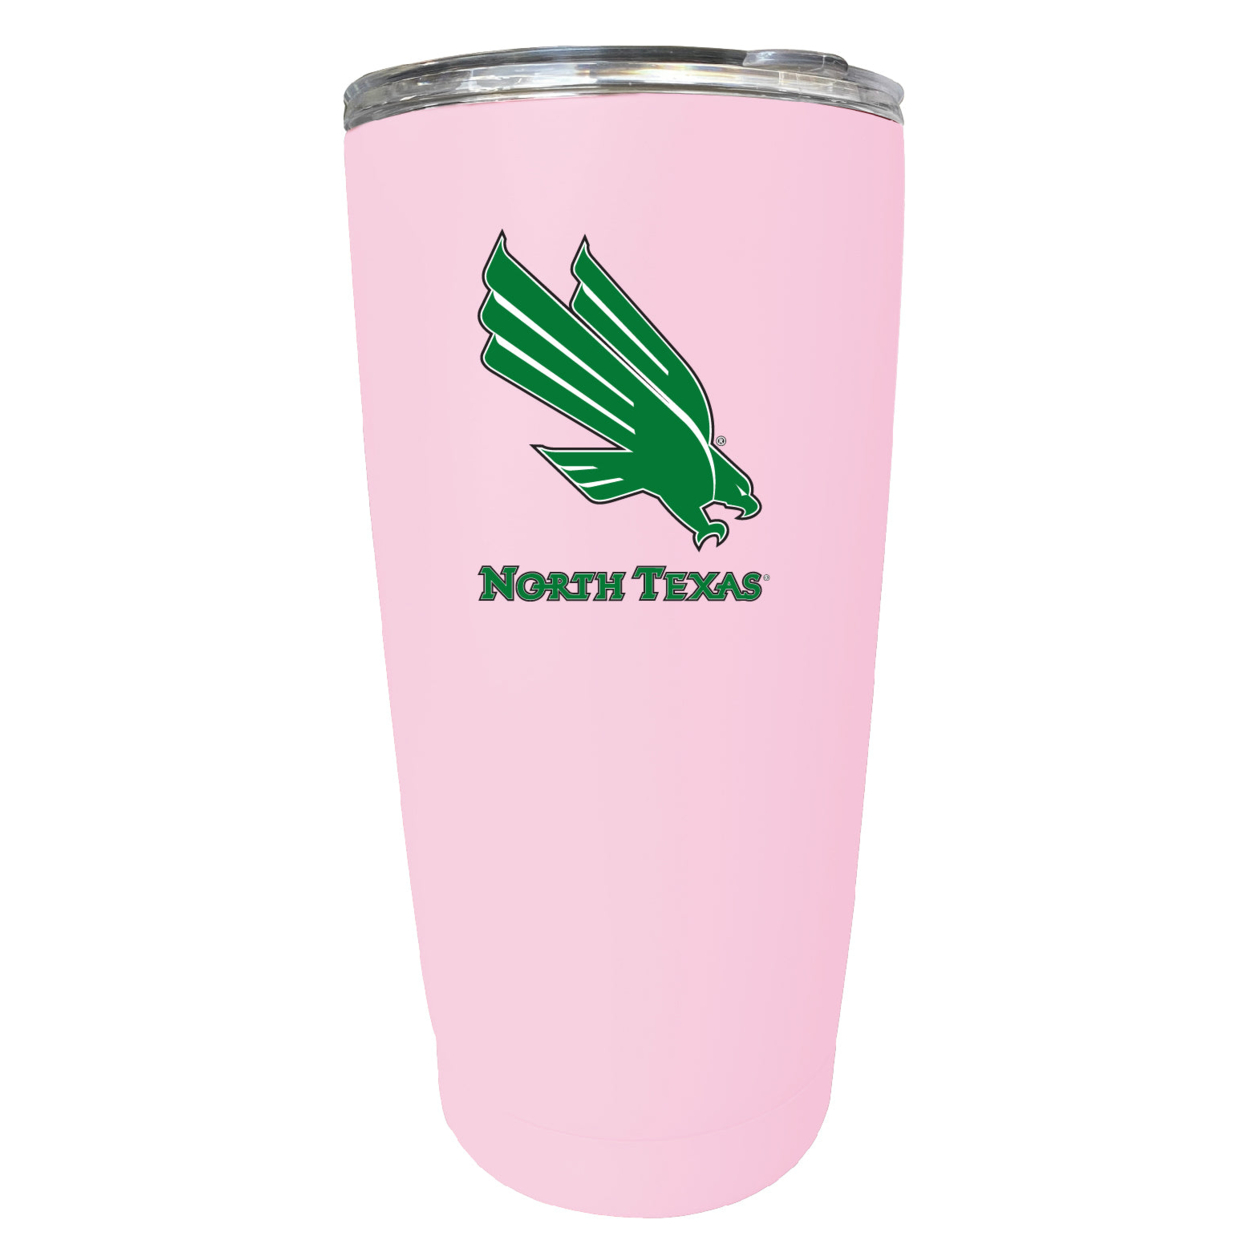 North Texas 16 Oz Stainless Steel Insulated Tumbler - Green